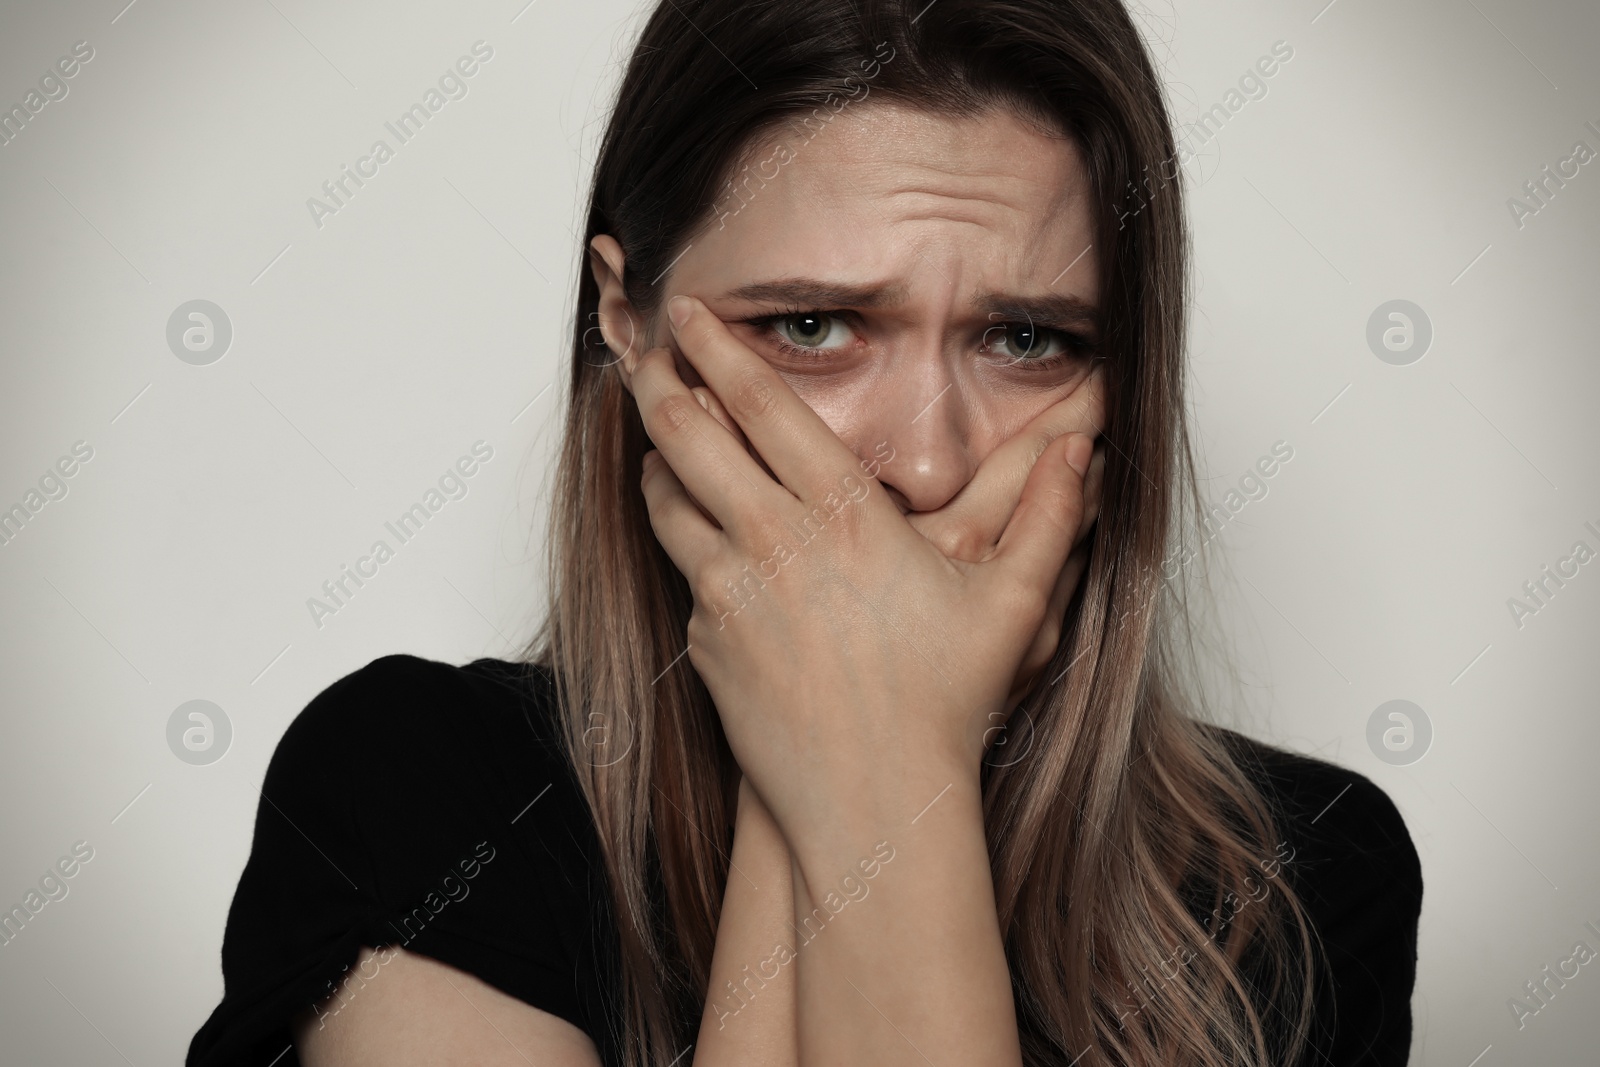 Photo of Scared woman covering mouth with her hands on light background. Stop violence